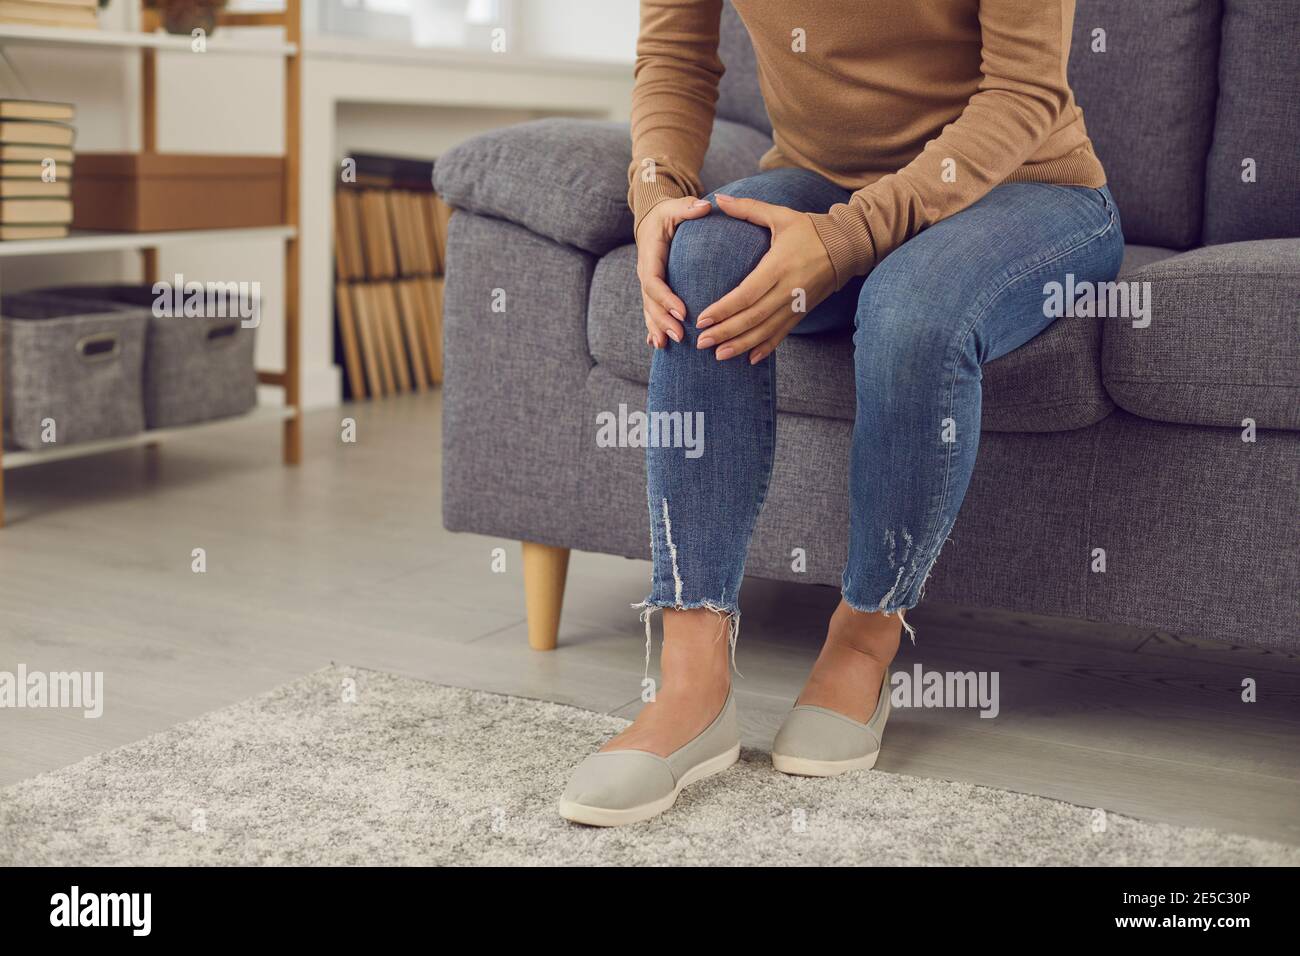 Woman who has rheumatic disorder or has hurt knee in home accident massaging her knee cap Stock Photo